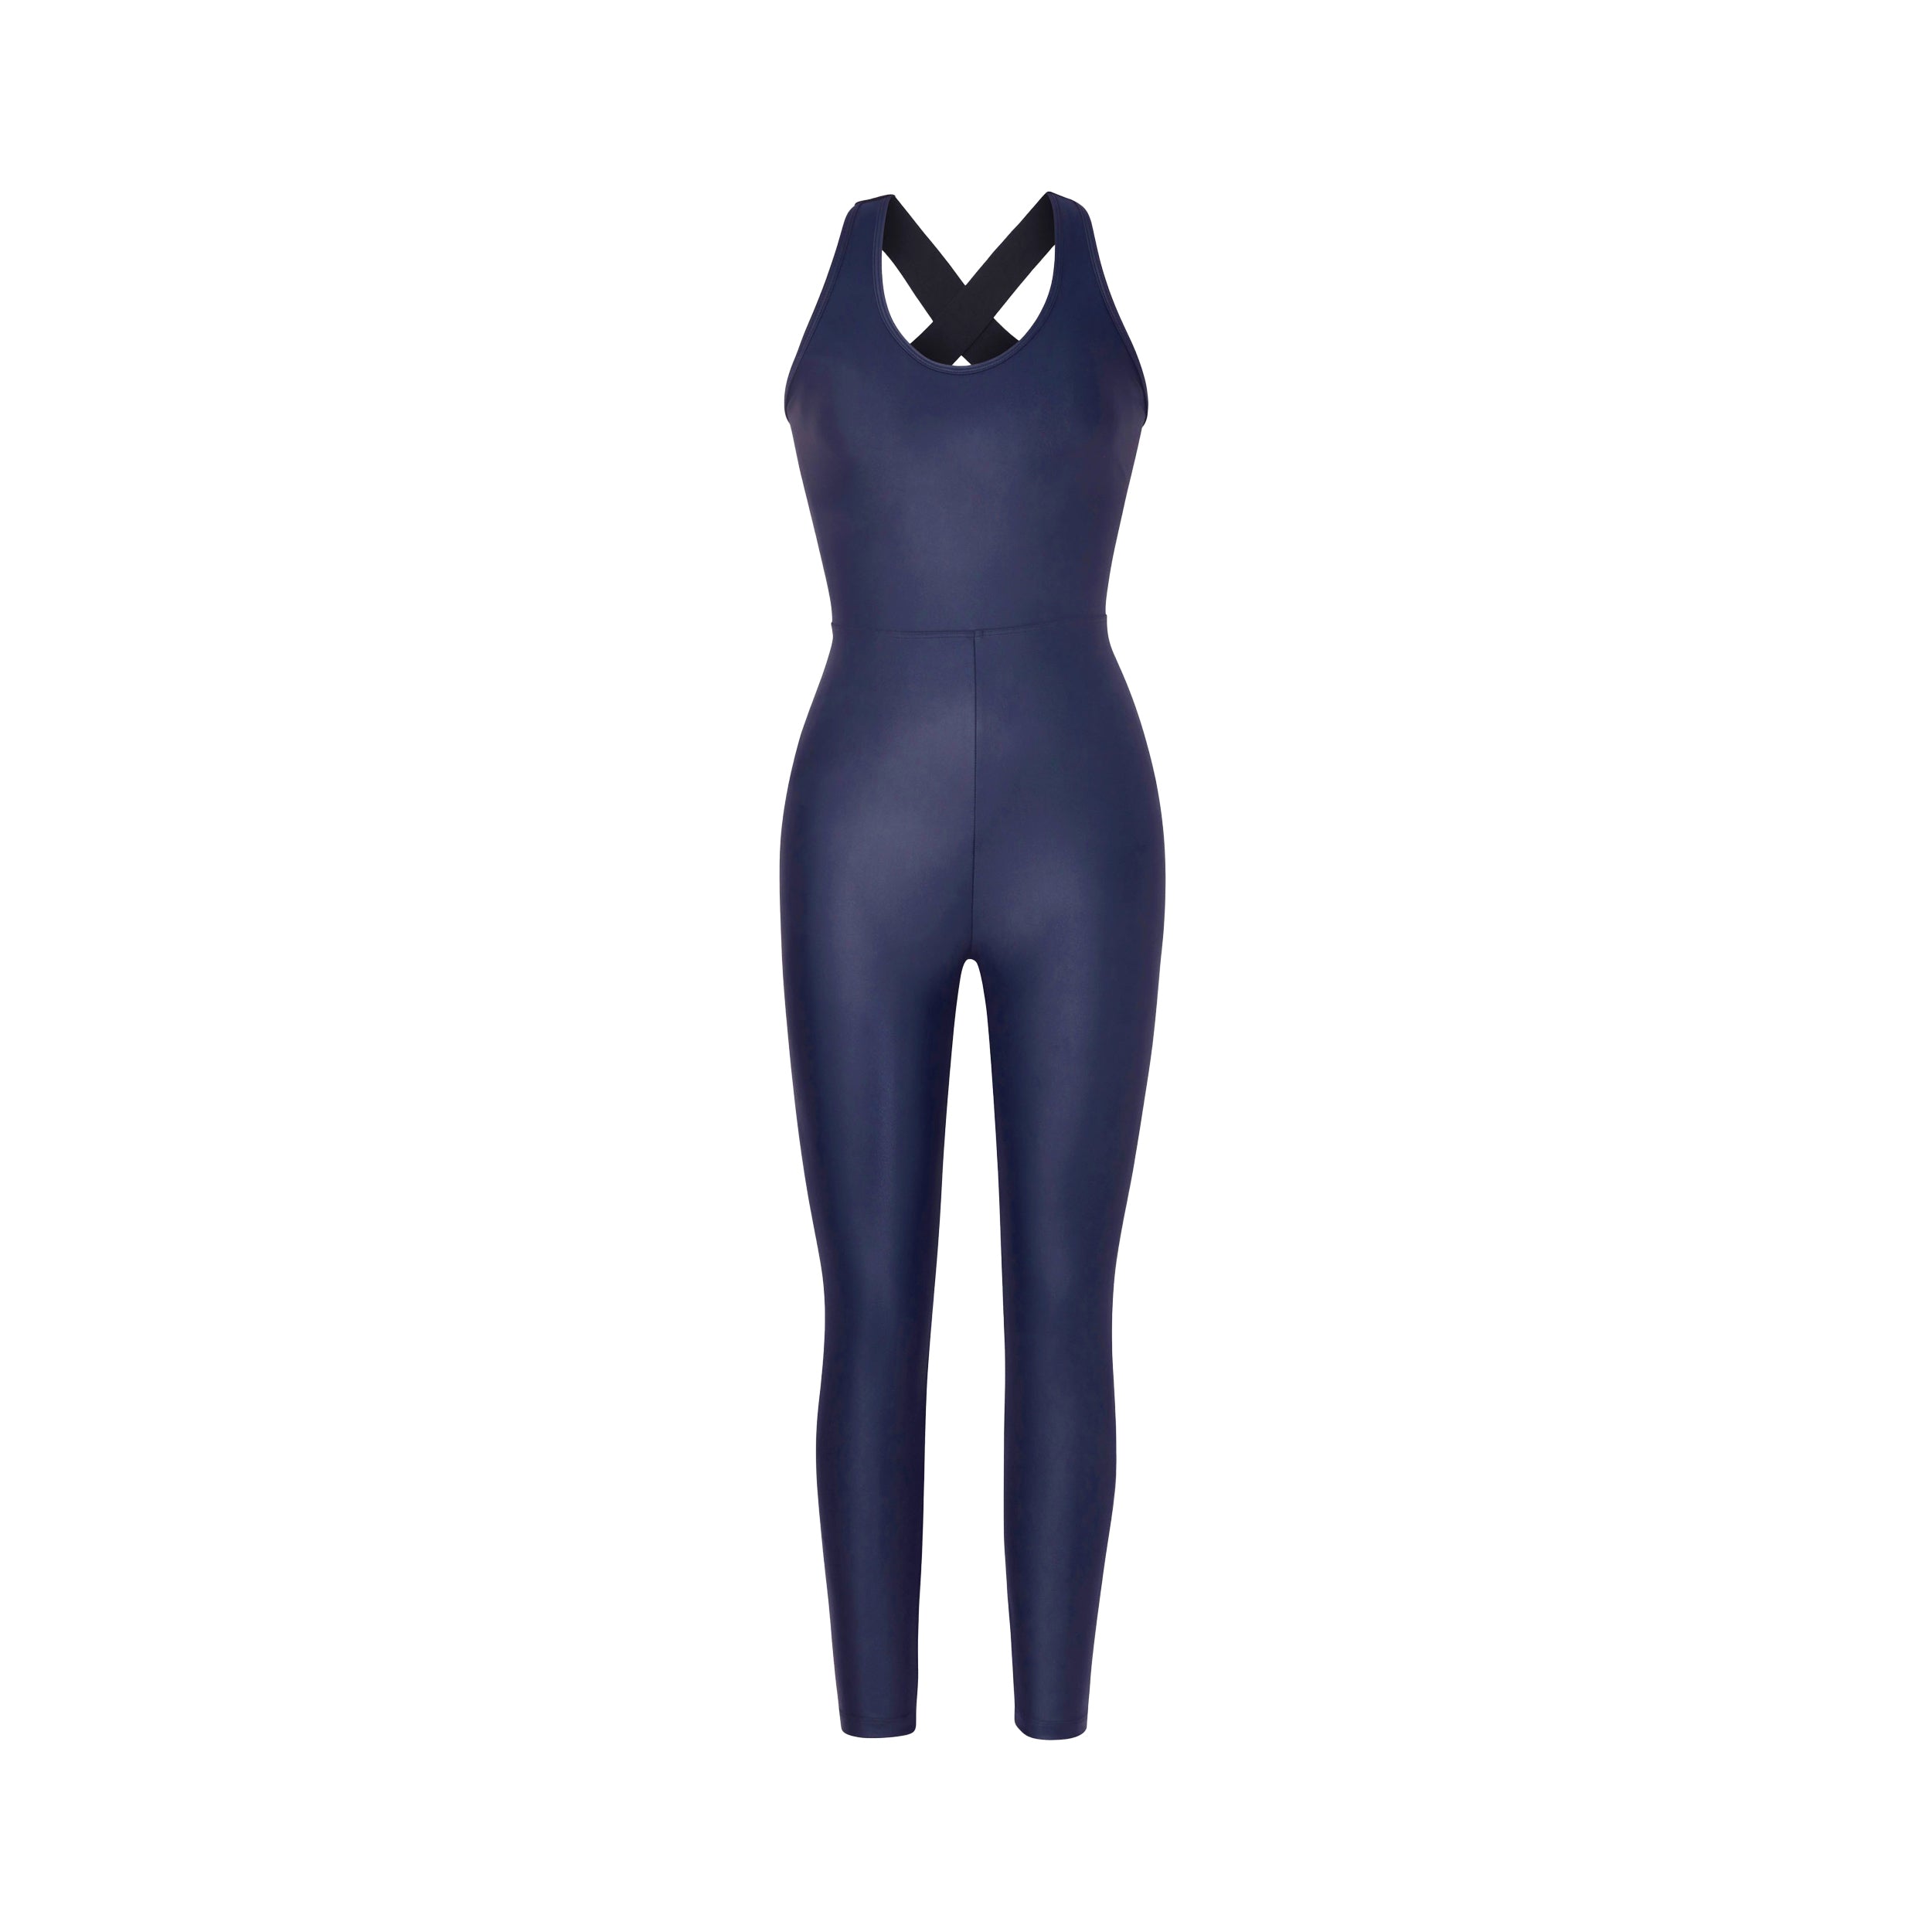 Product shot of navy jumpsuit designed with a figure-flattering waistline and strappy back. Designed with our iconic Liquid shine fabric.